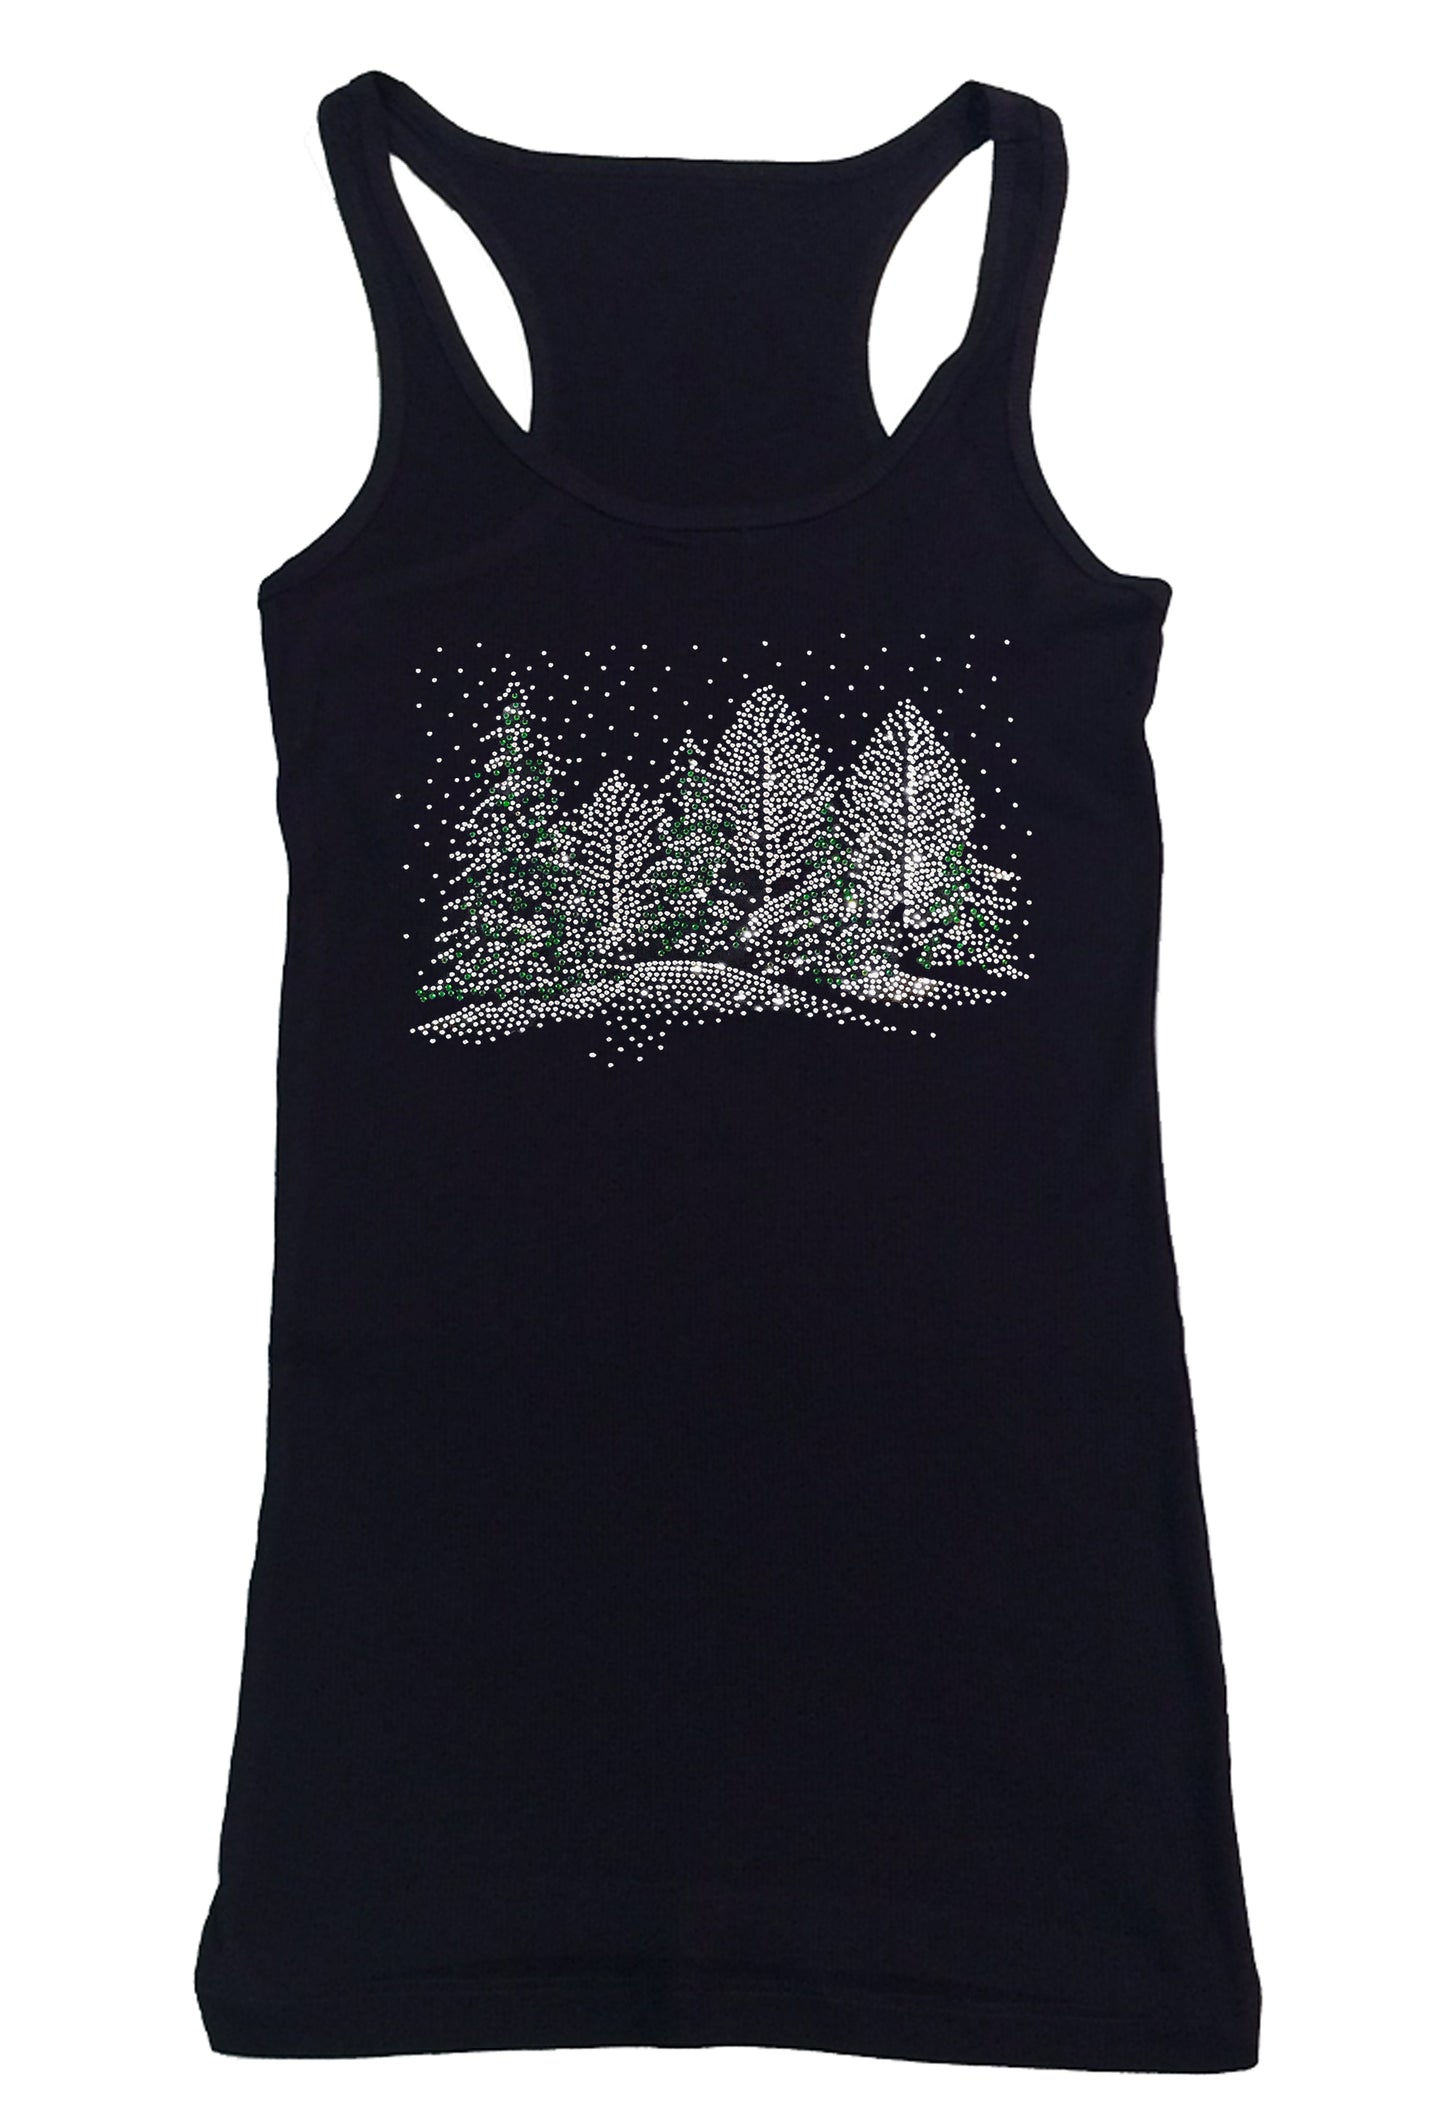 Womens T-shirt with Winter Scene with Snow and Christmas Trees in Rhinestones